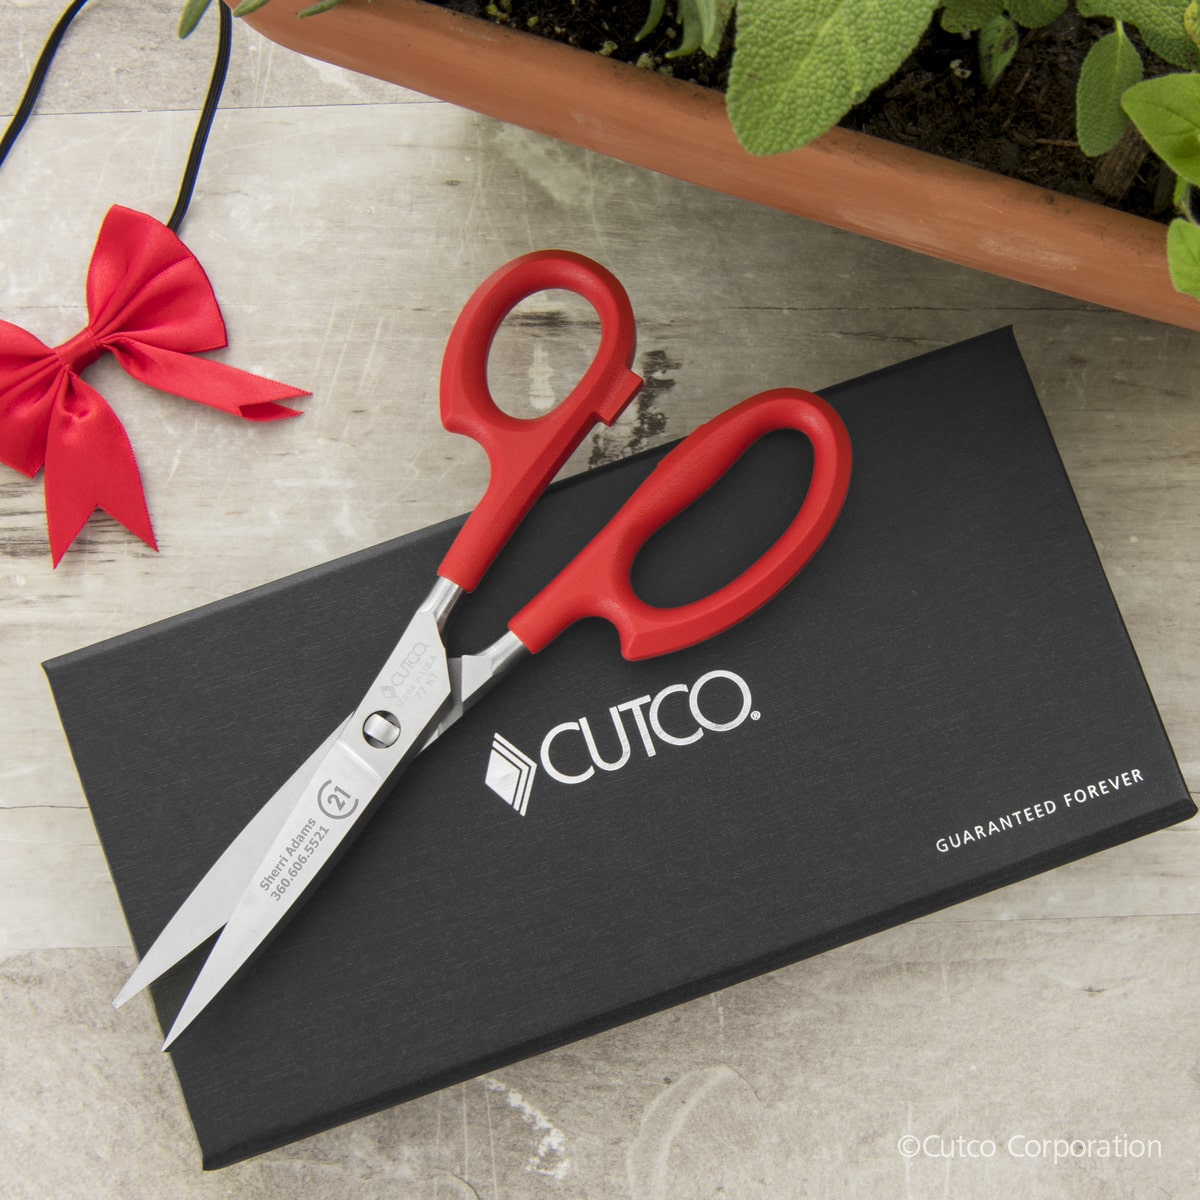  CUTCO Model 77 Super Shears with Red handles